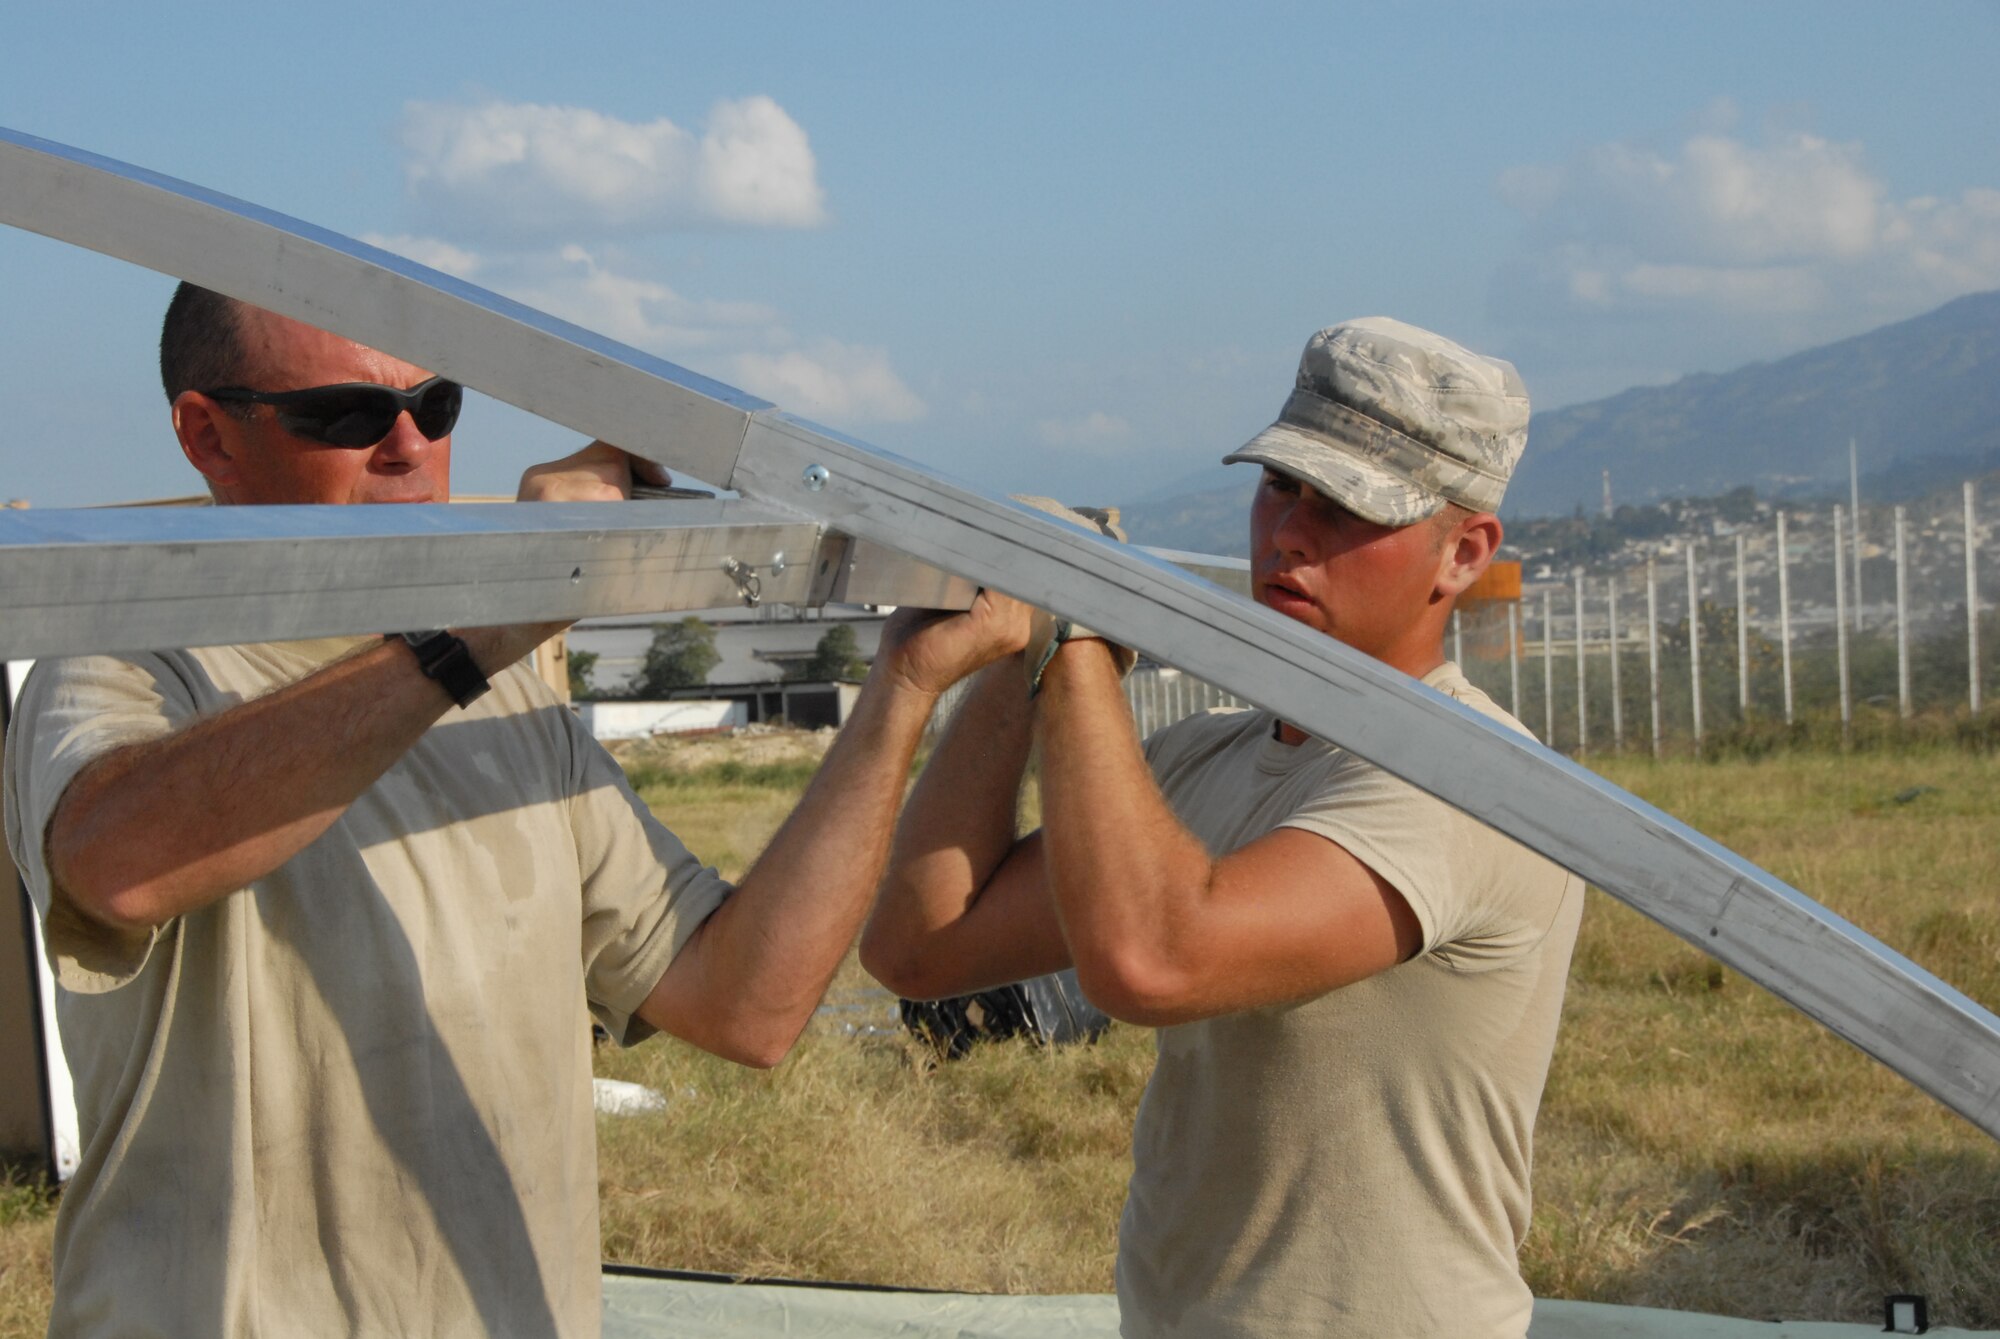 Master Sgt. Casey Batterton (left) and Senior Airman Mike Stroebel build the frame for tents that will house medical workers. The tents are built on the EMEDS site, which will support 24 hour medical operations.